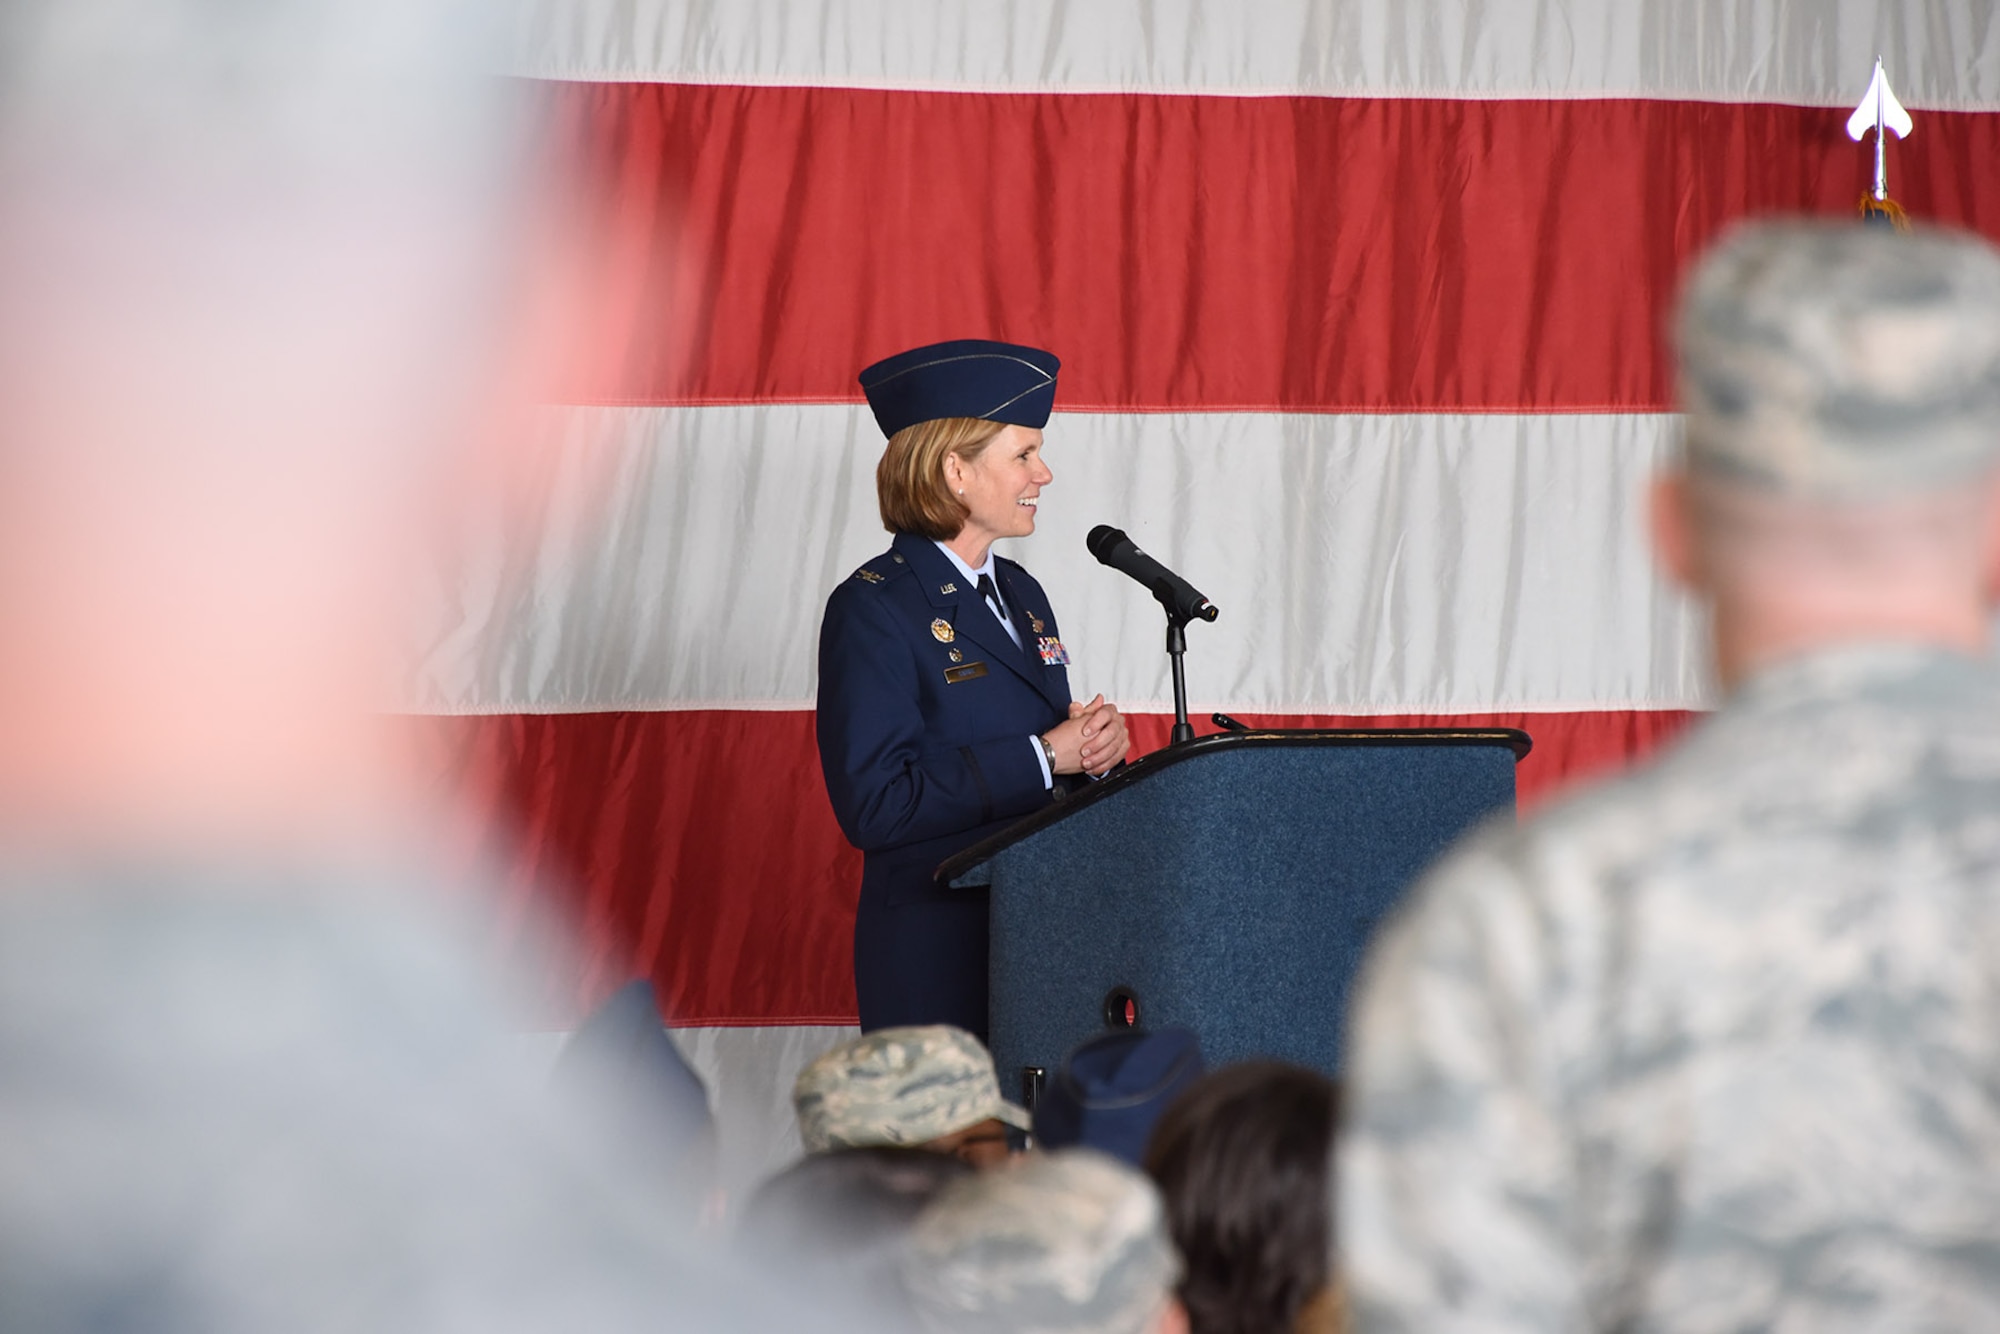 Col. Regina “Torch” Sabric, 419th Fighter Wing commander, speaks to a crowd of Citizen Airmen, base leaders, and community leaders during a change of command ceremony April 14, 2018, at Hill Air Force Base, Utah.